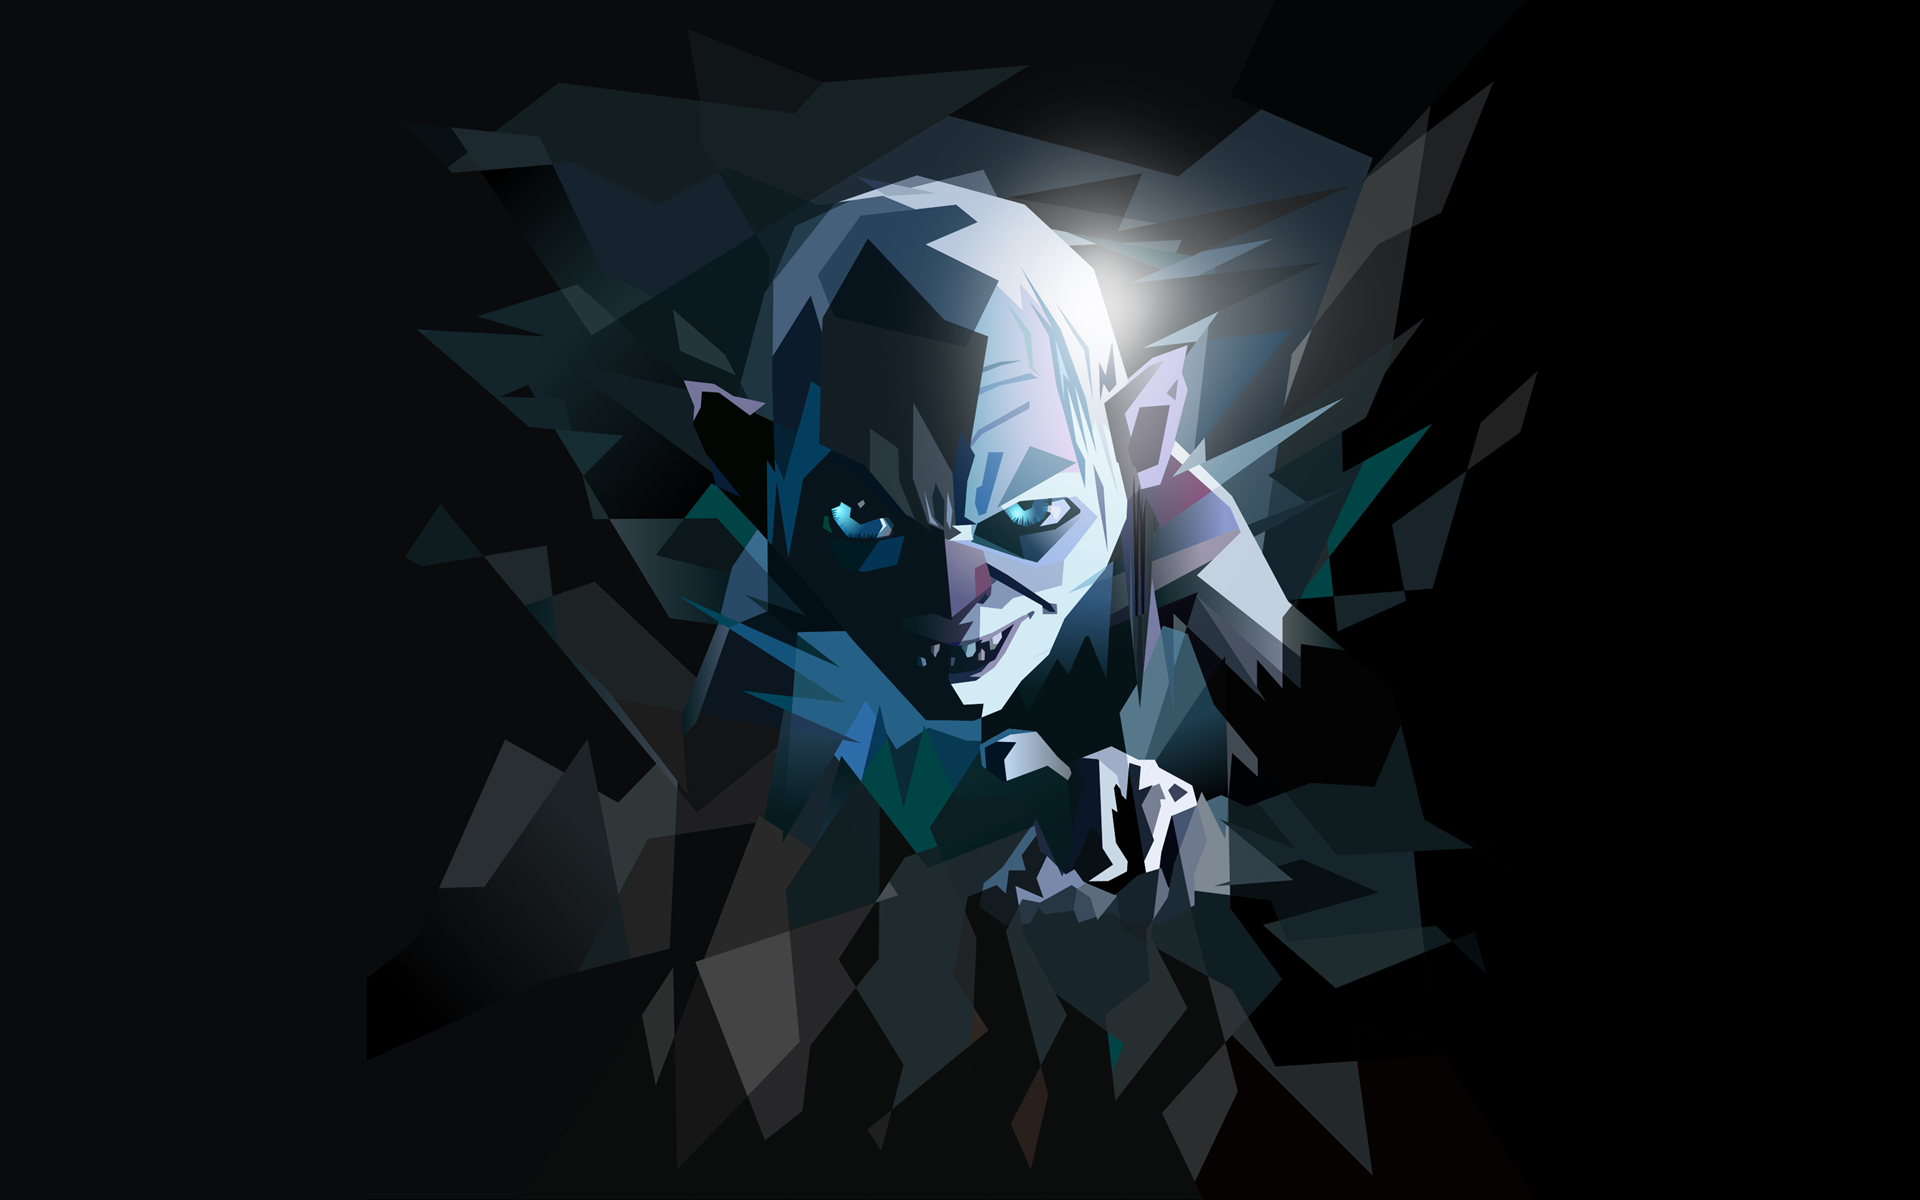 The Lord Of The Rings The Hobbit Gollum Low Poly Digital Art Smeagol Fantasy Art 1920x1200